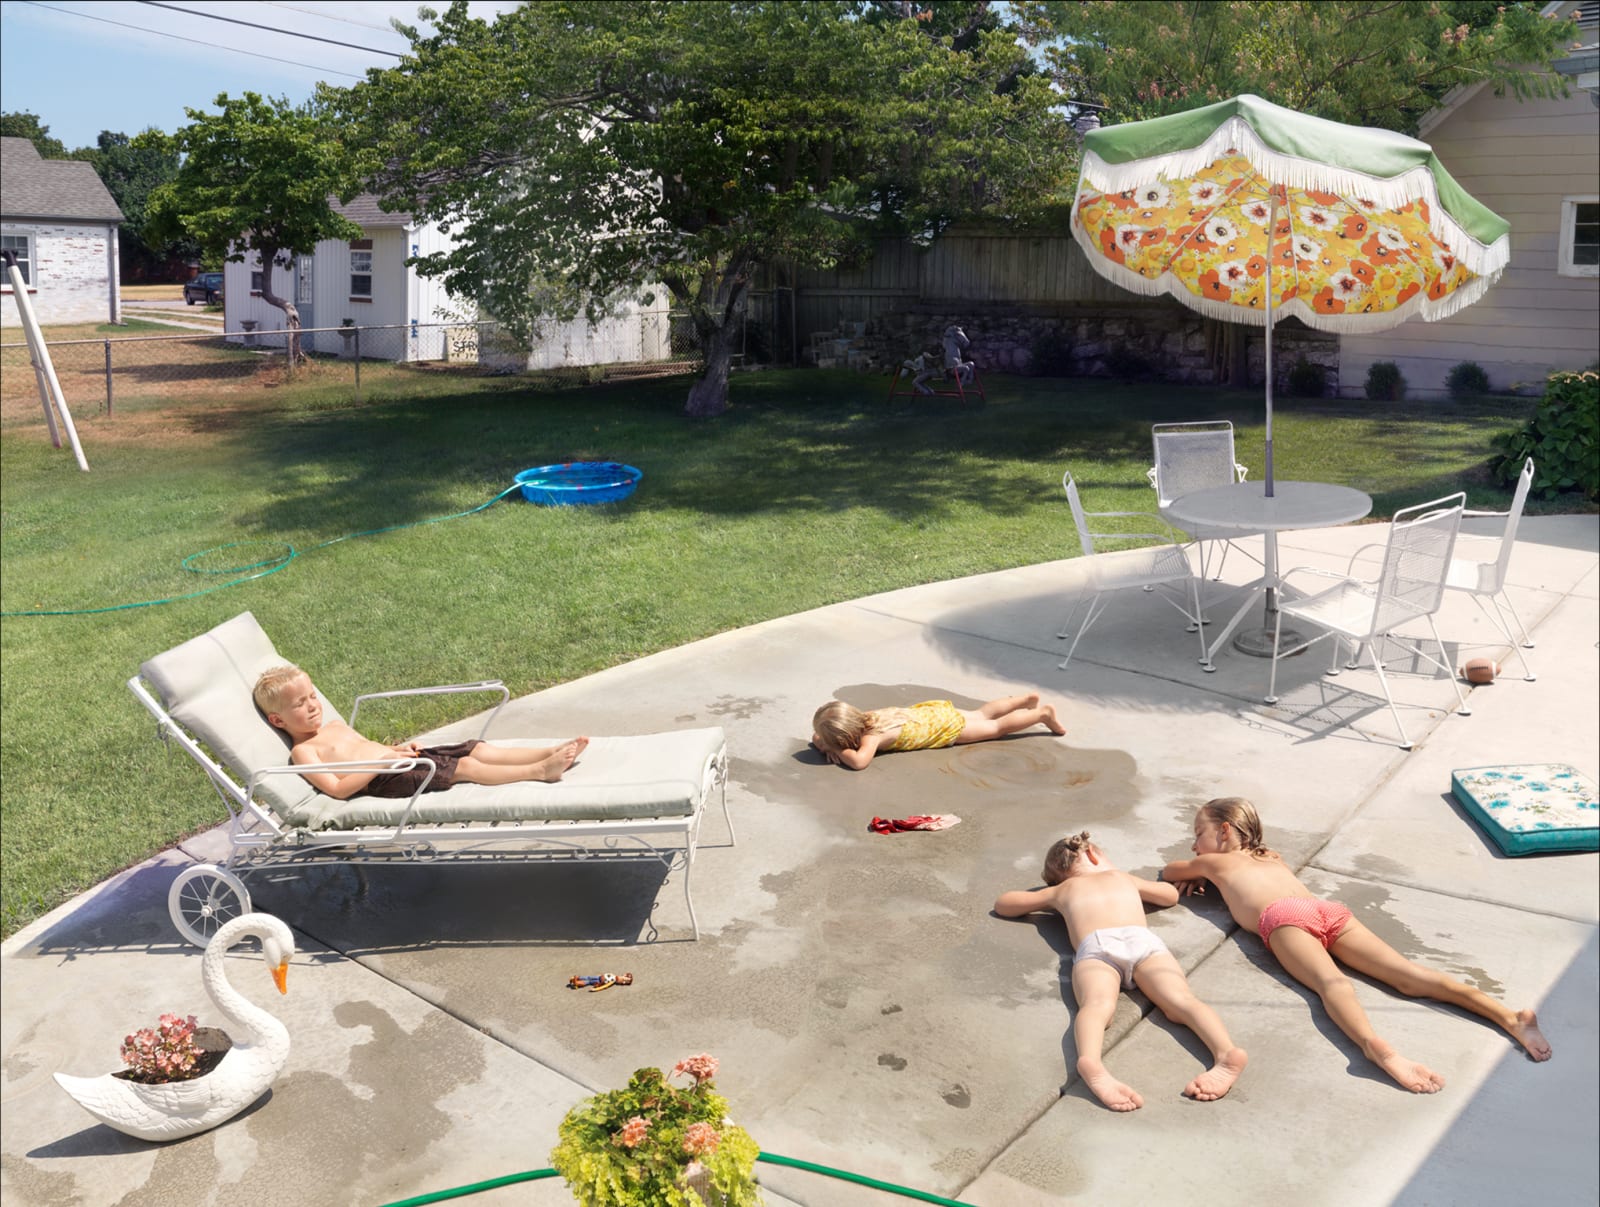 Julie Blackmon, Laying Out, 2015